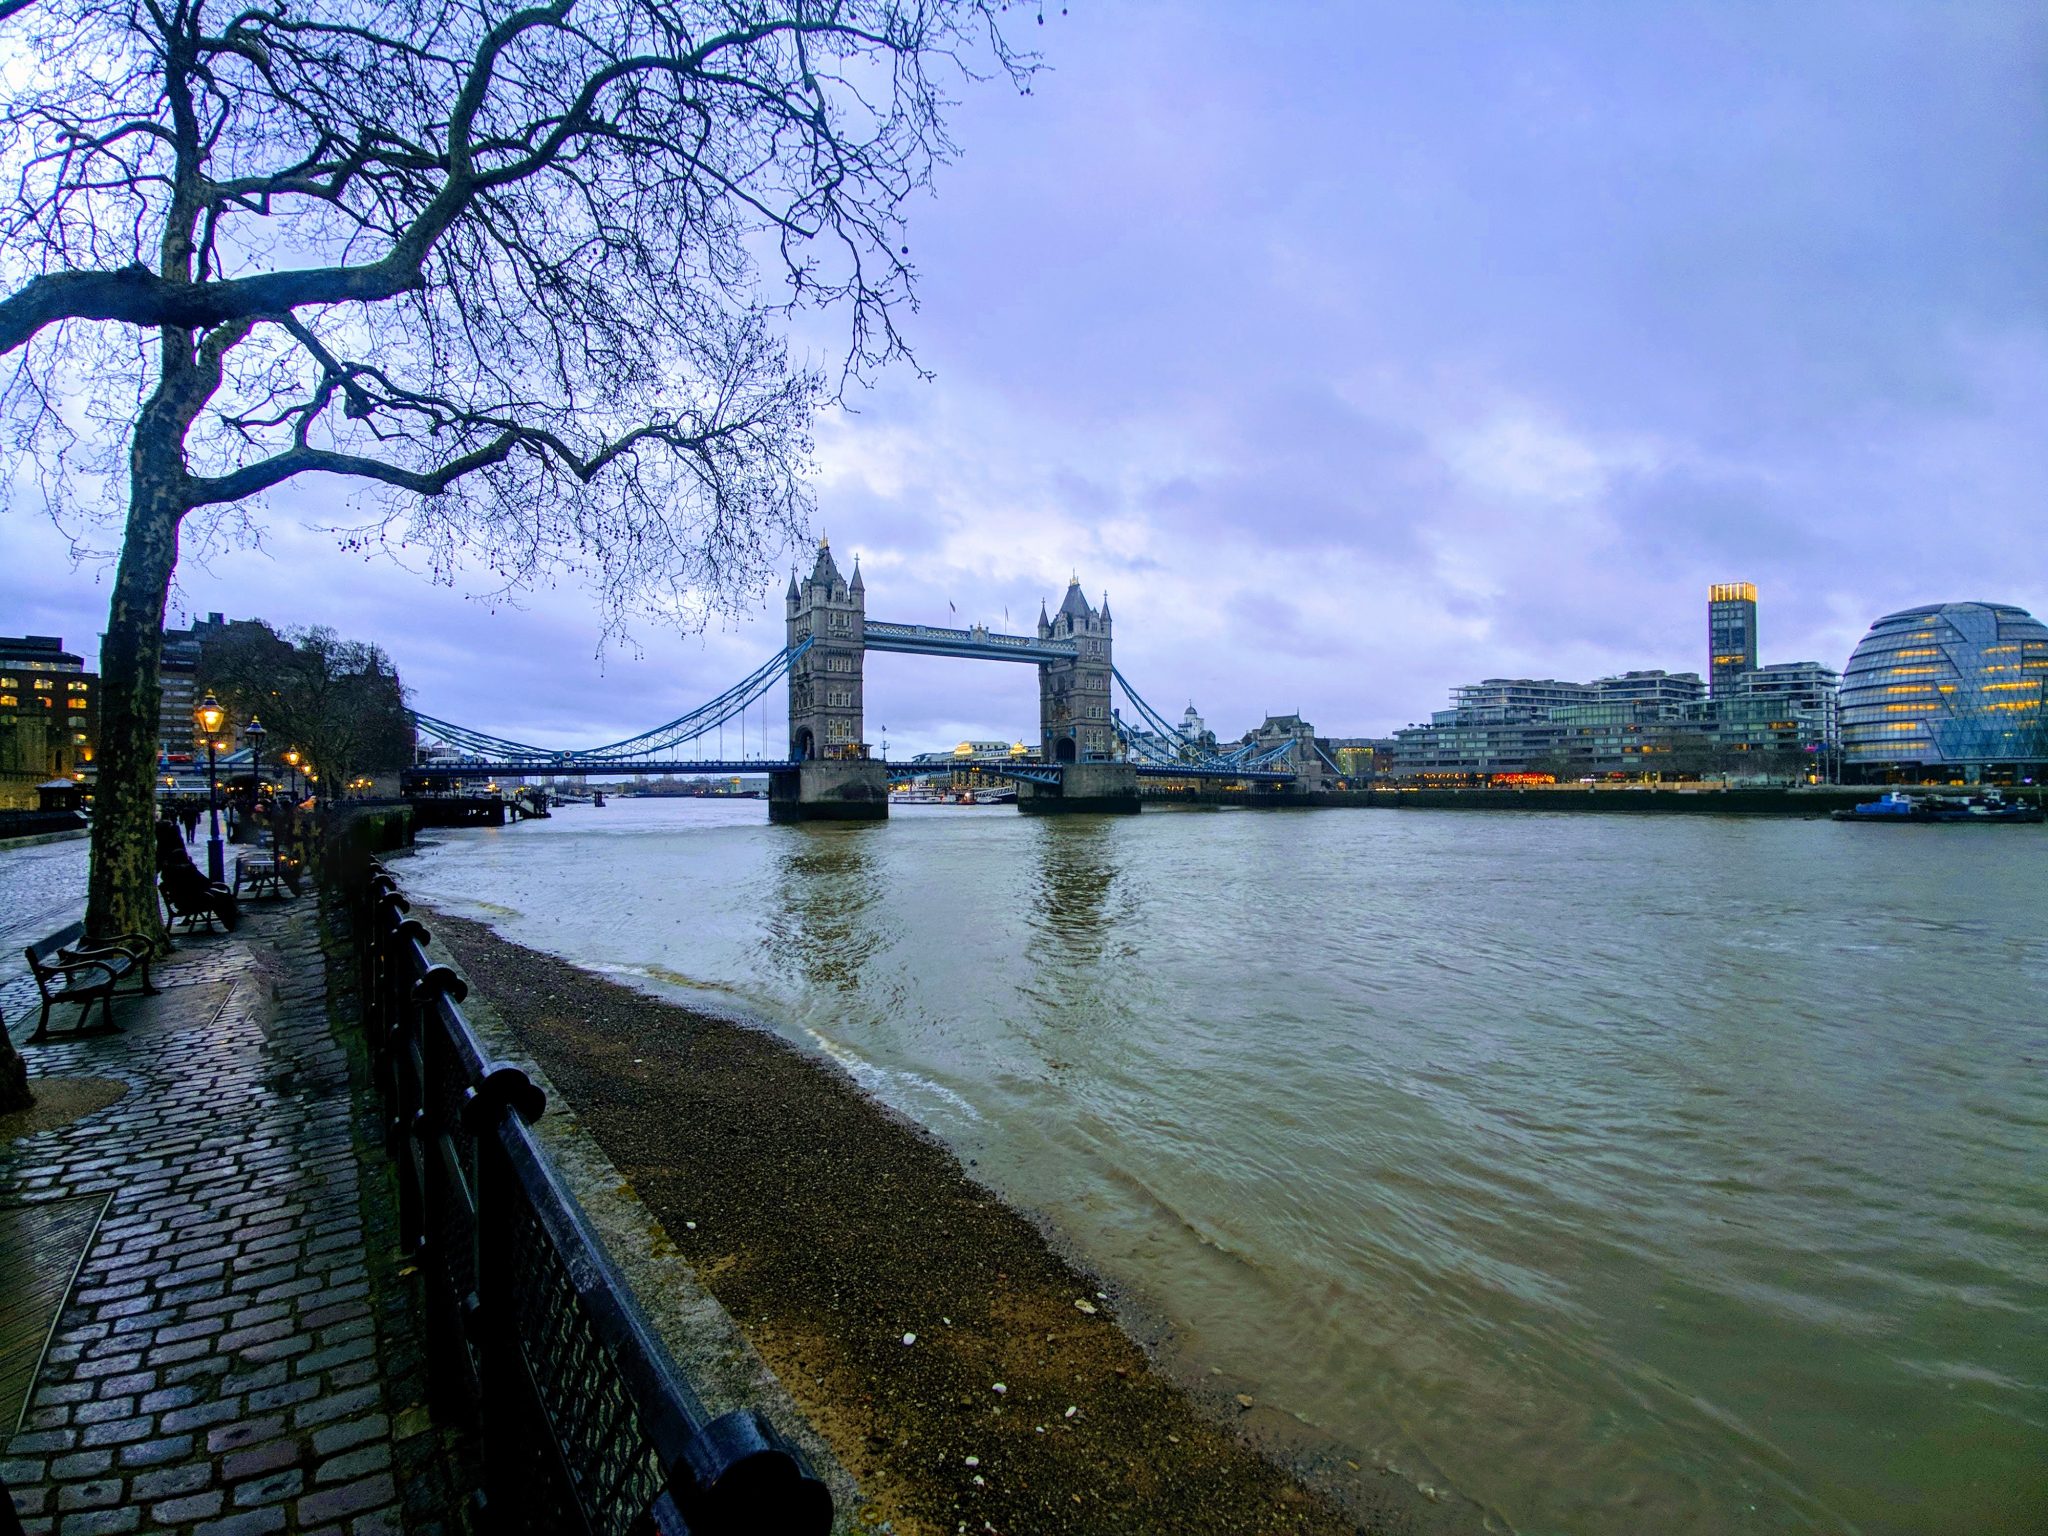 Tower Bridge and the Thames River at dusk in London, UK